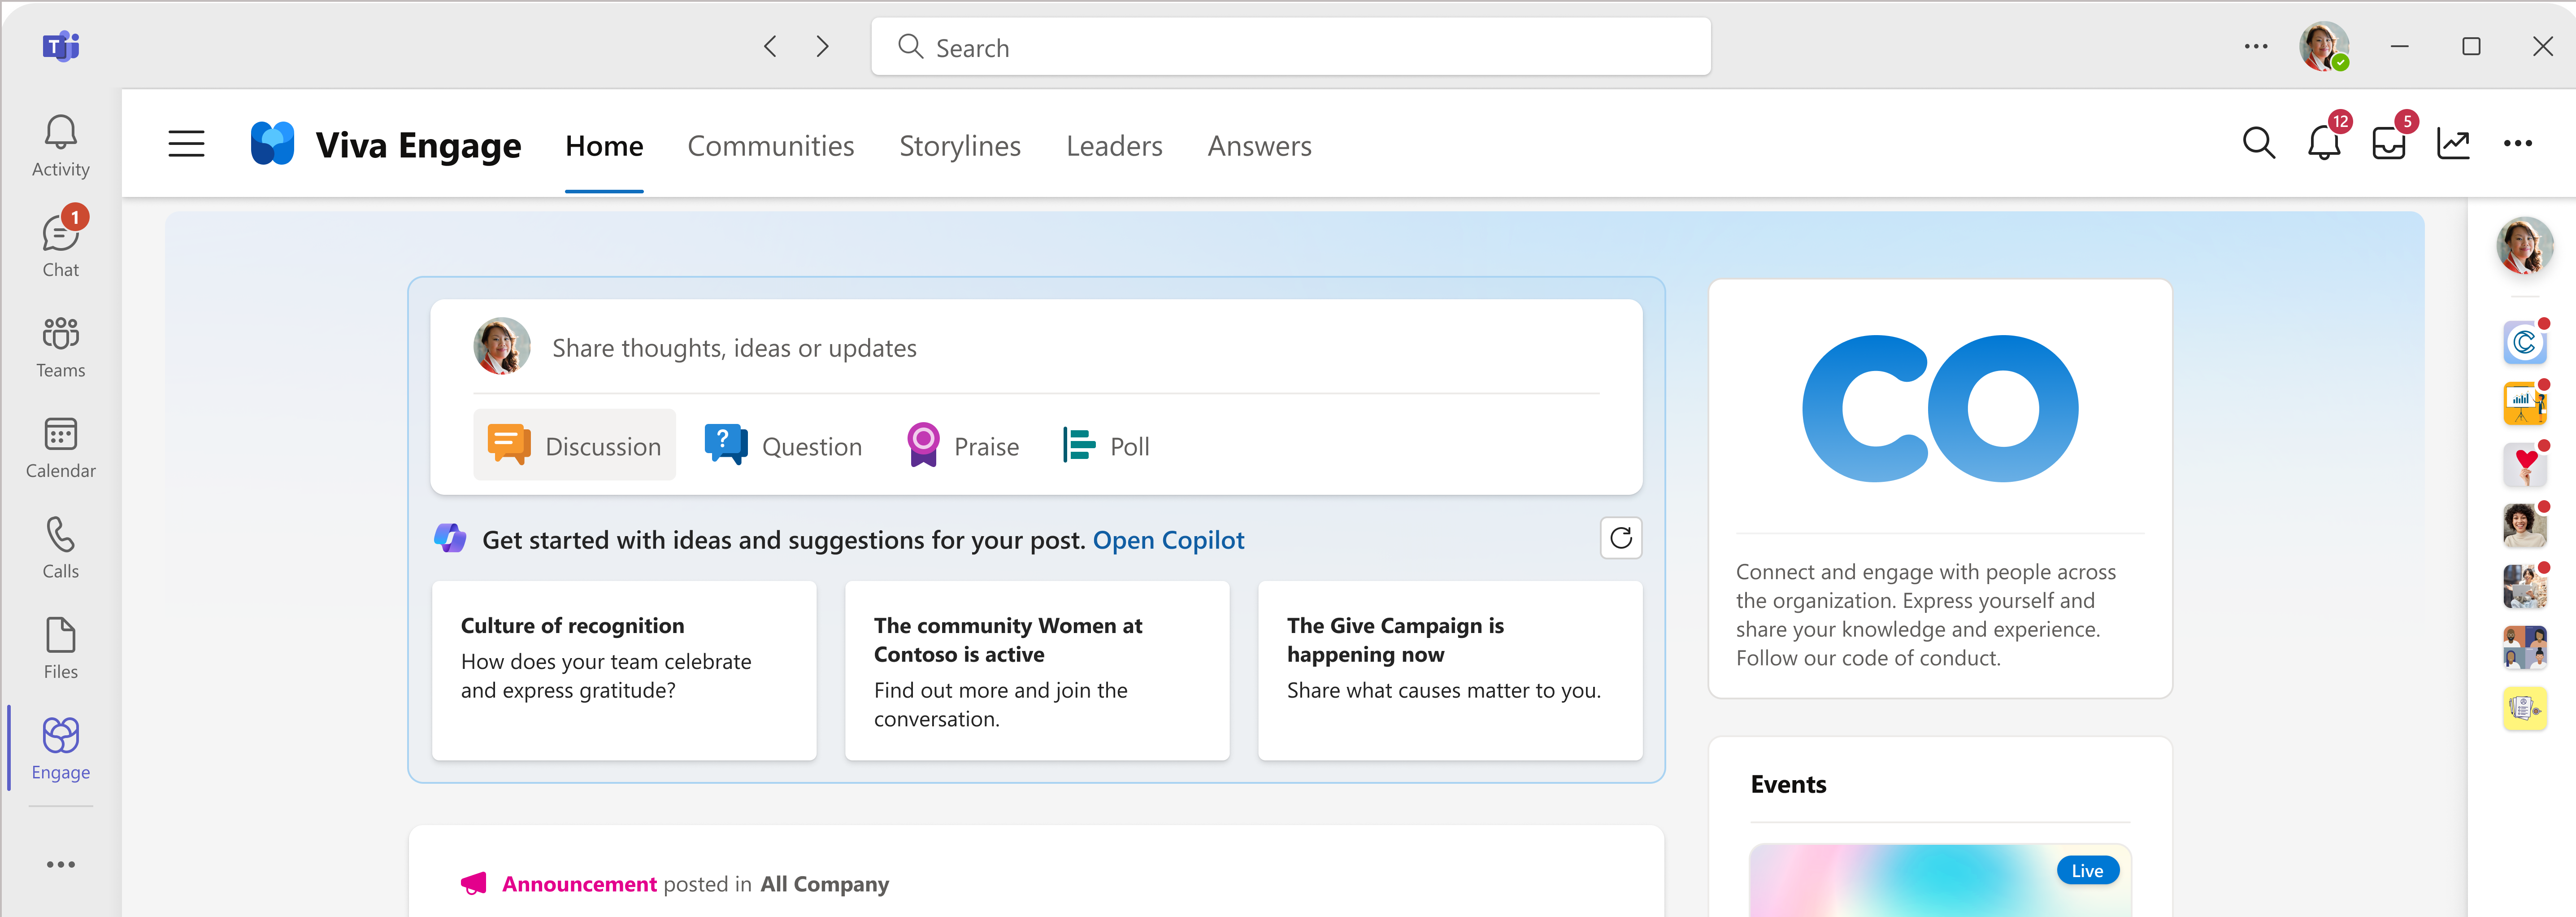 Screenshot shows the Open Copilot link on the Viva Engage Home page.